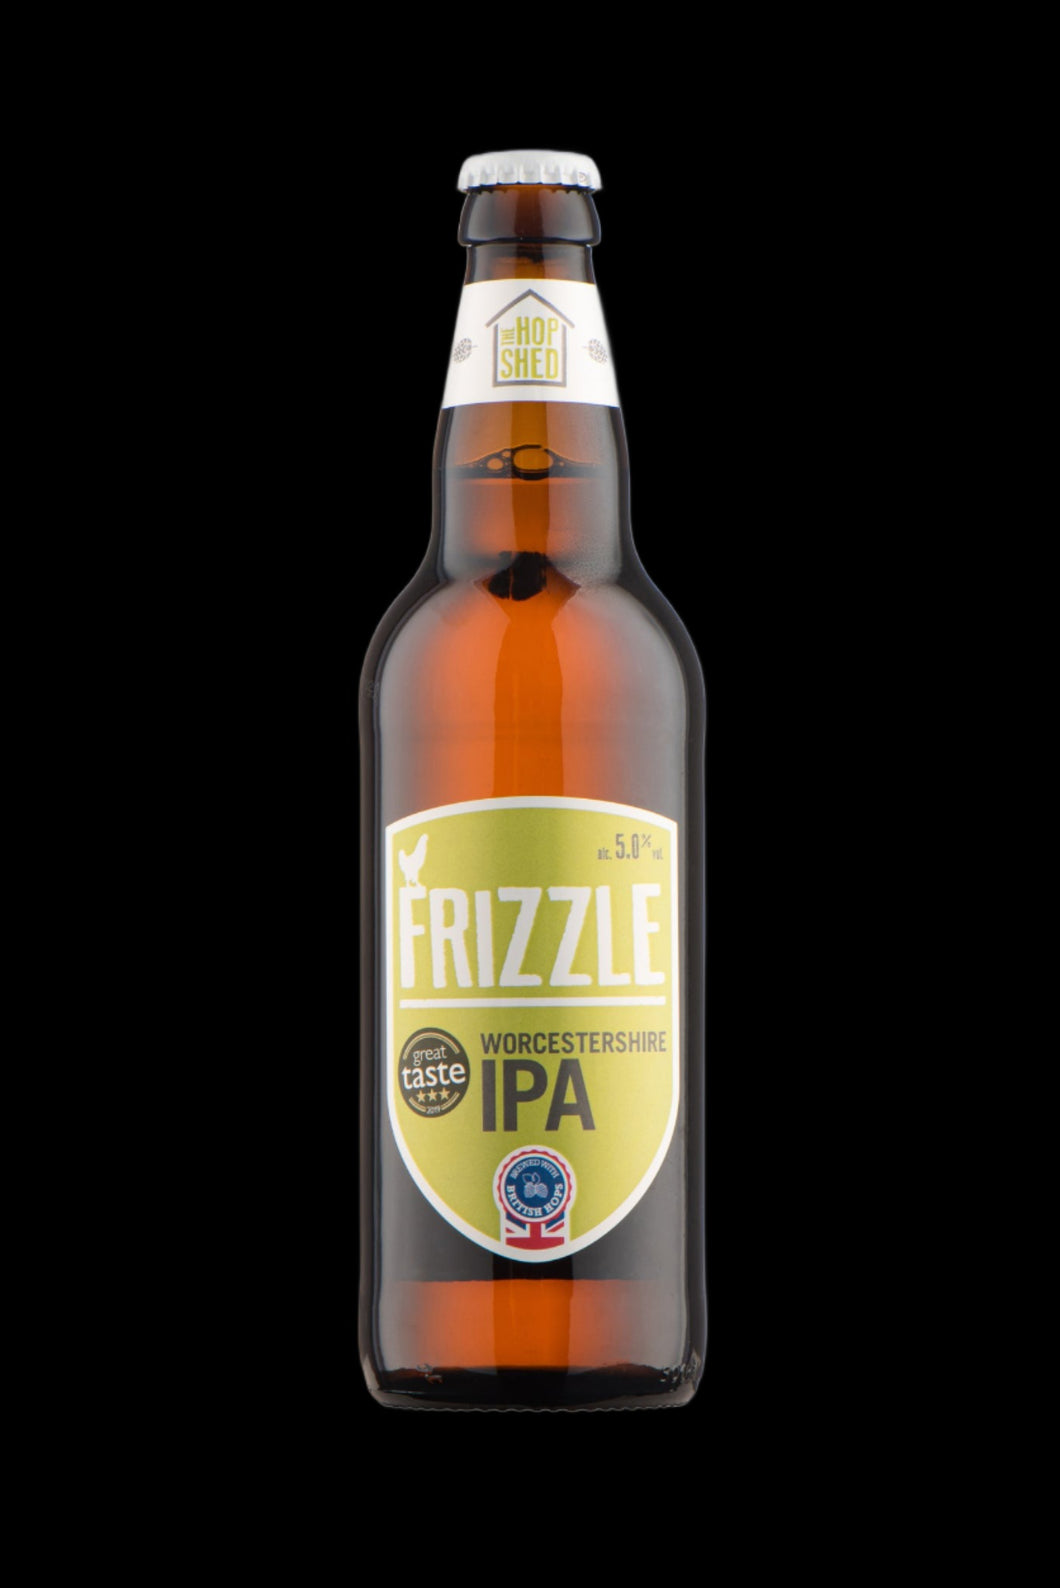 Frizzle Worcestershire IPA 5.0% - 12 x 500ml bottles